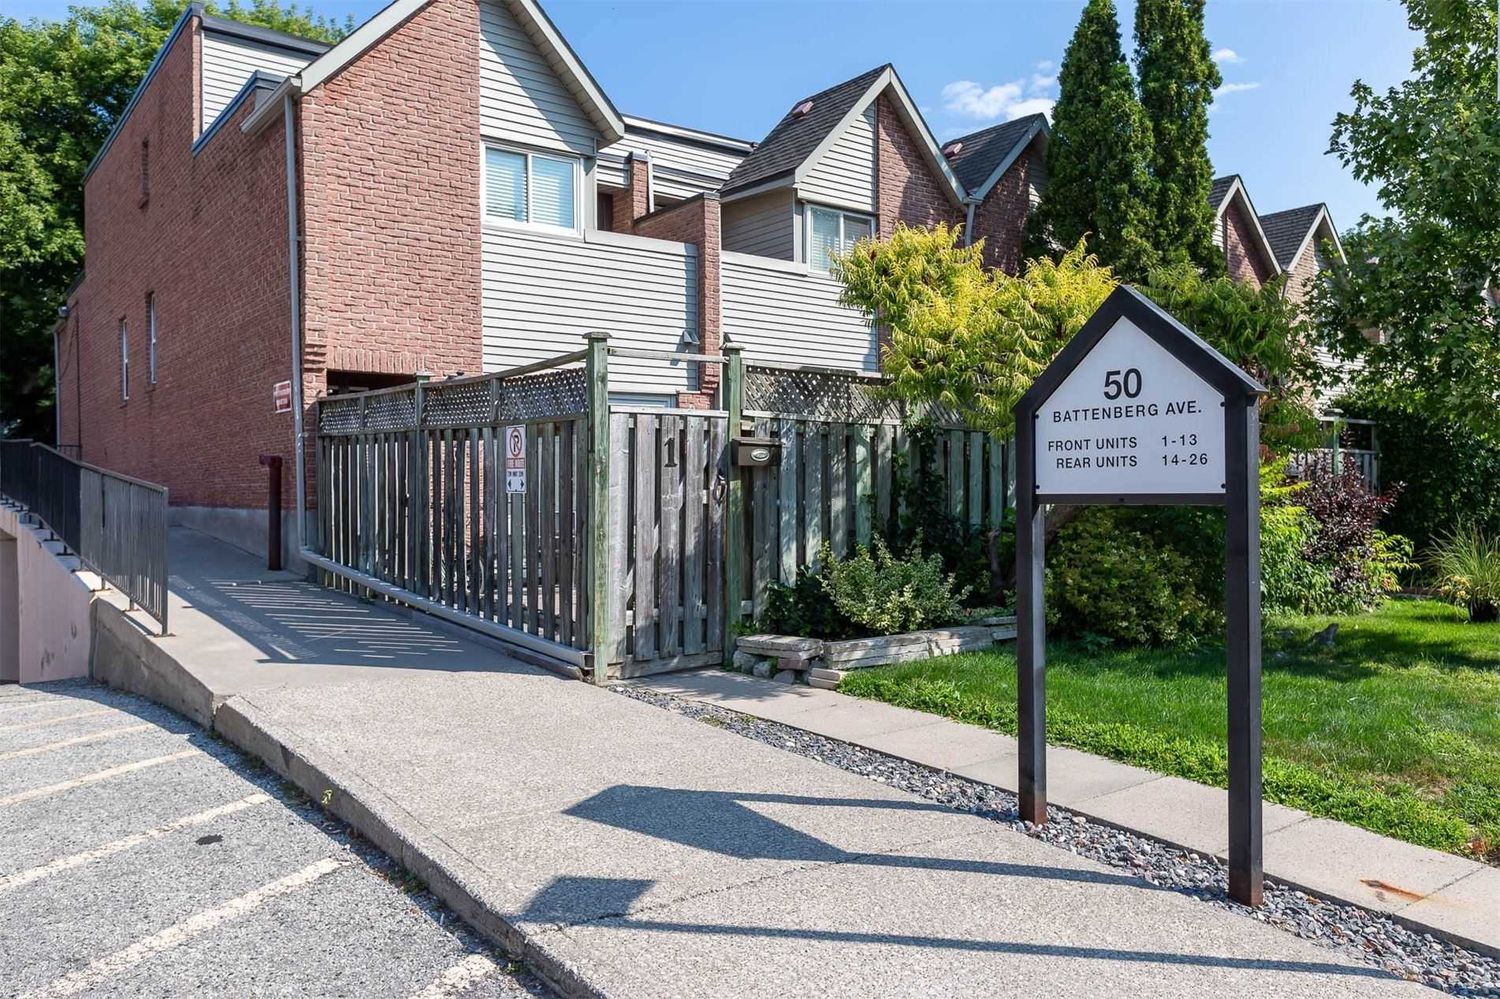 50 Battenberg Avenue. Battenberg Townhomes is located in  East End, Toronto - image #1 of 3